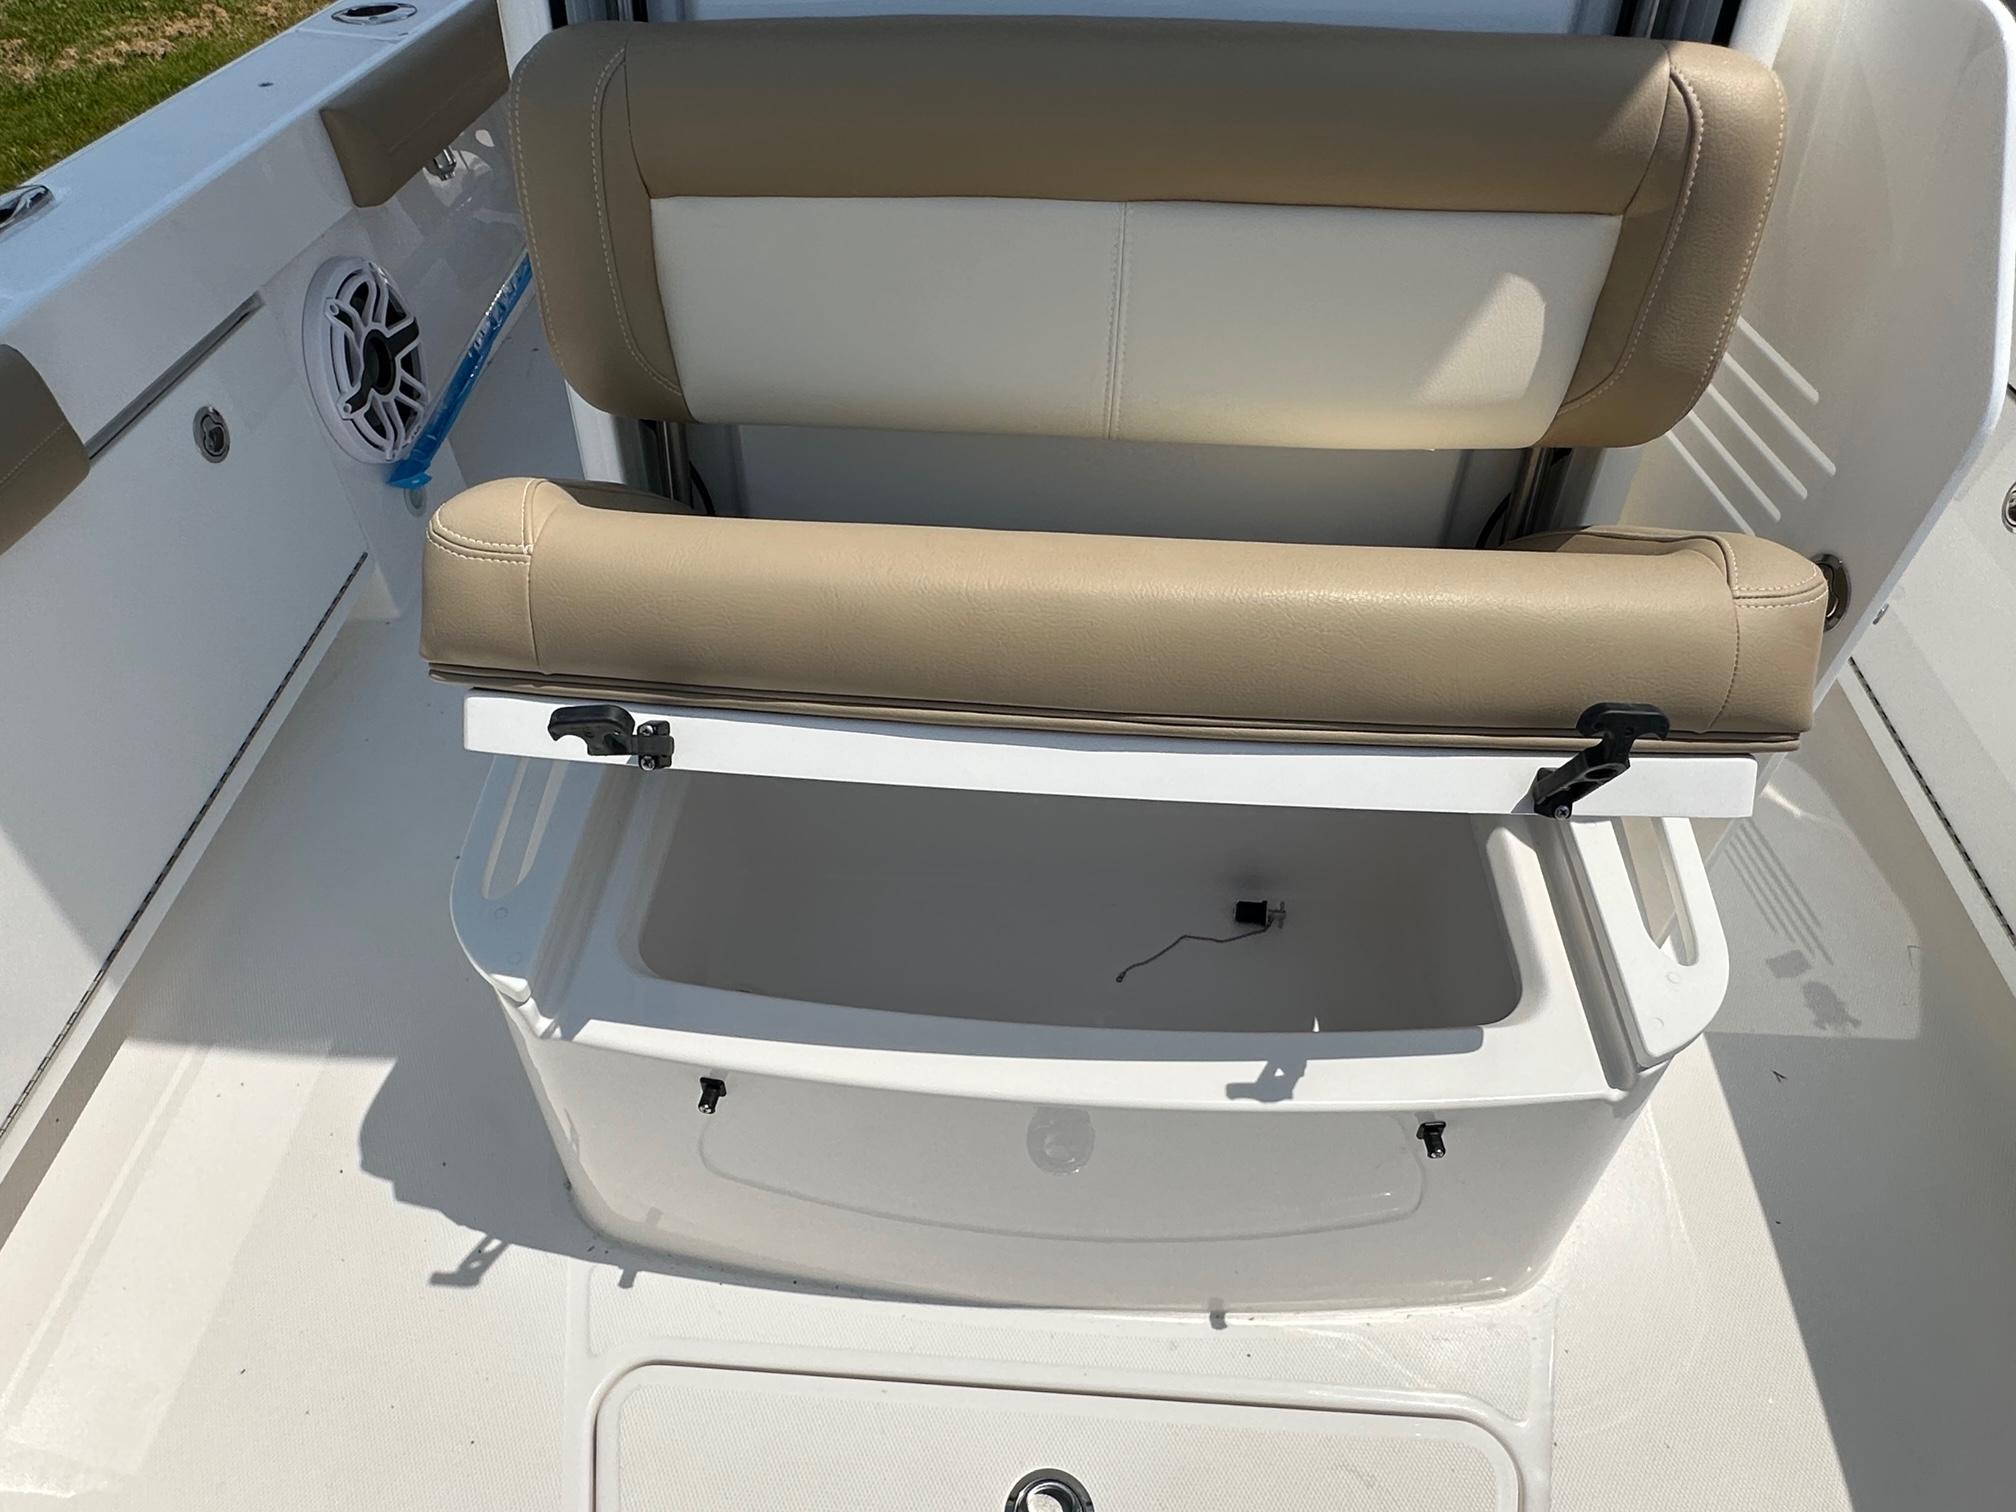 New 2023 Everglades 253 Center Console, 21619 Chester - Boat Trader